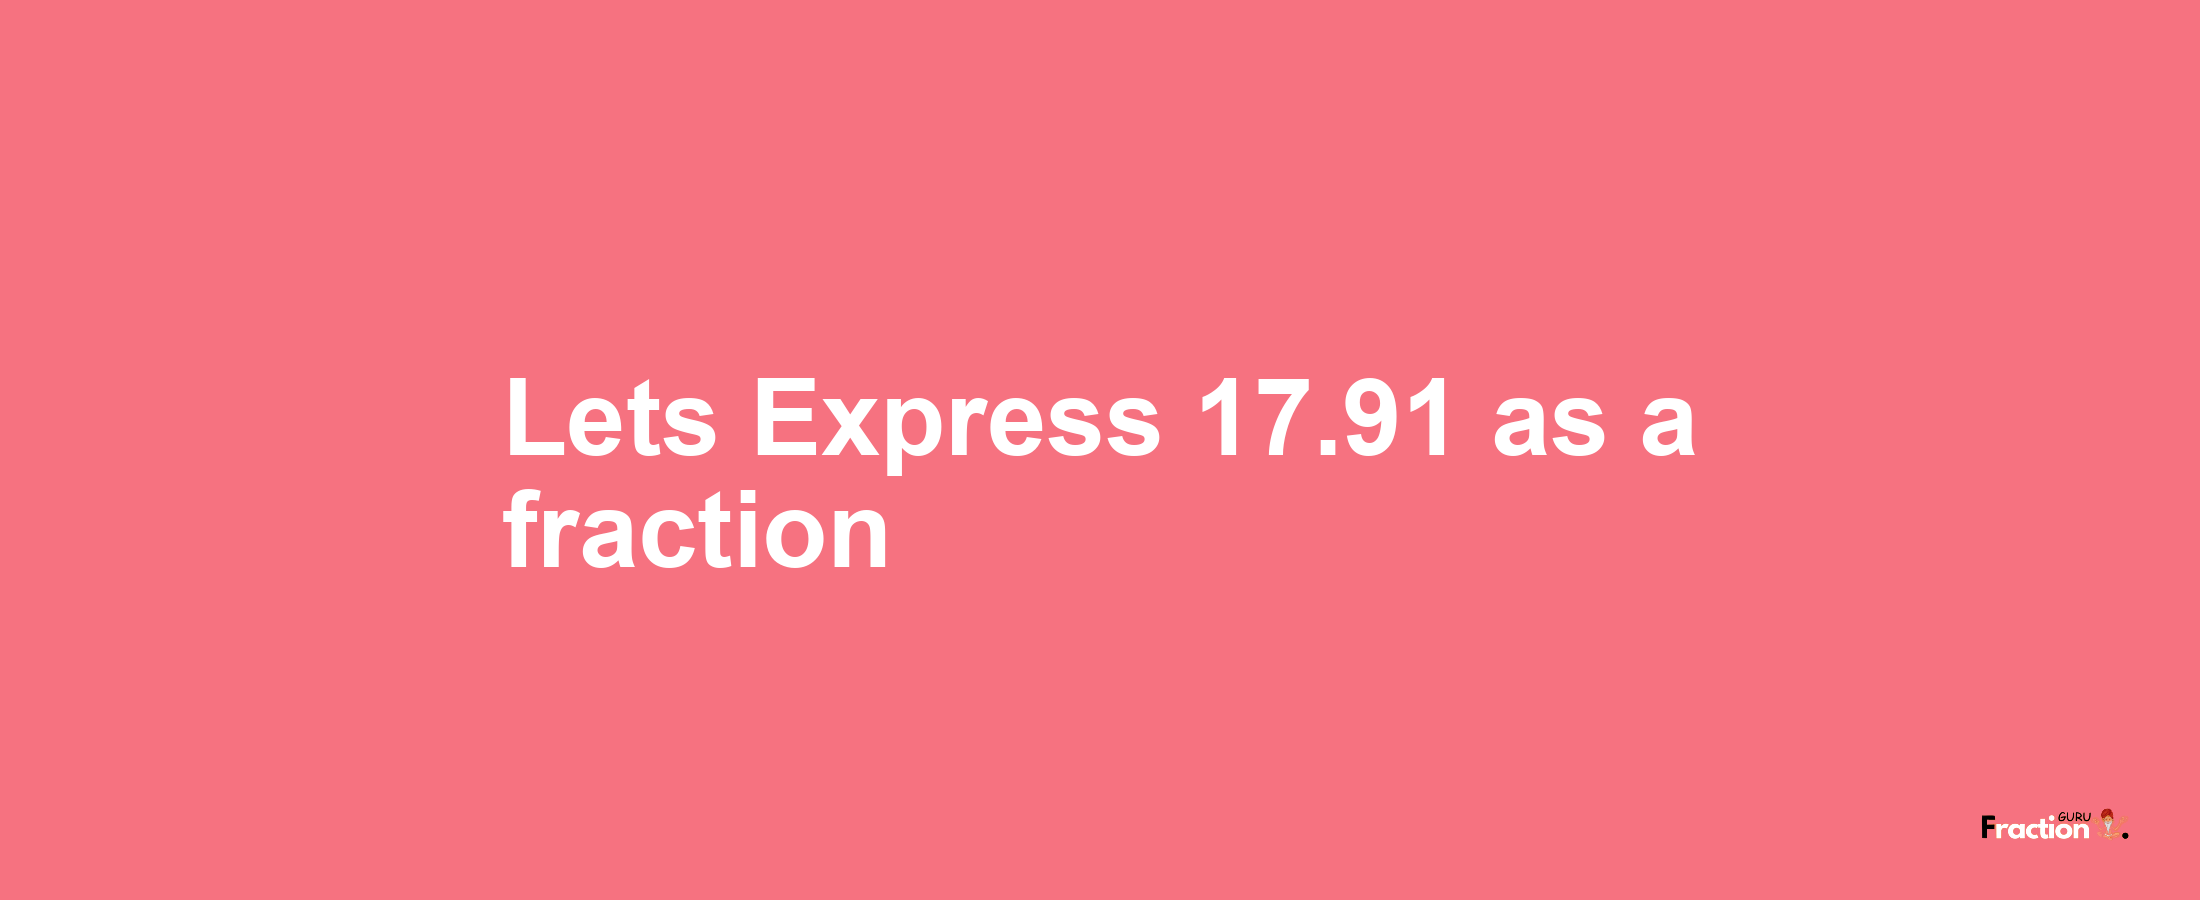 Lets Express 17.91 as afraction